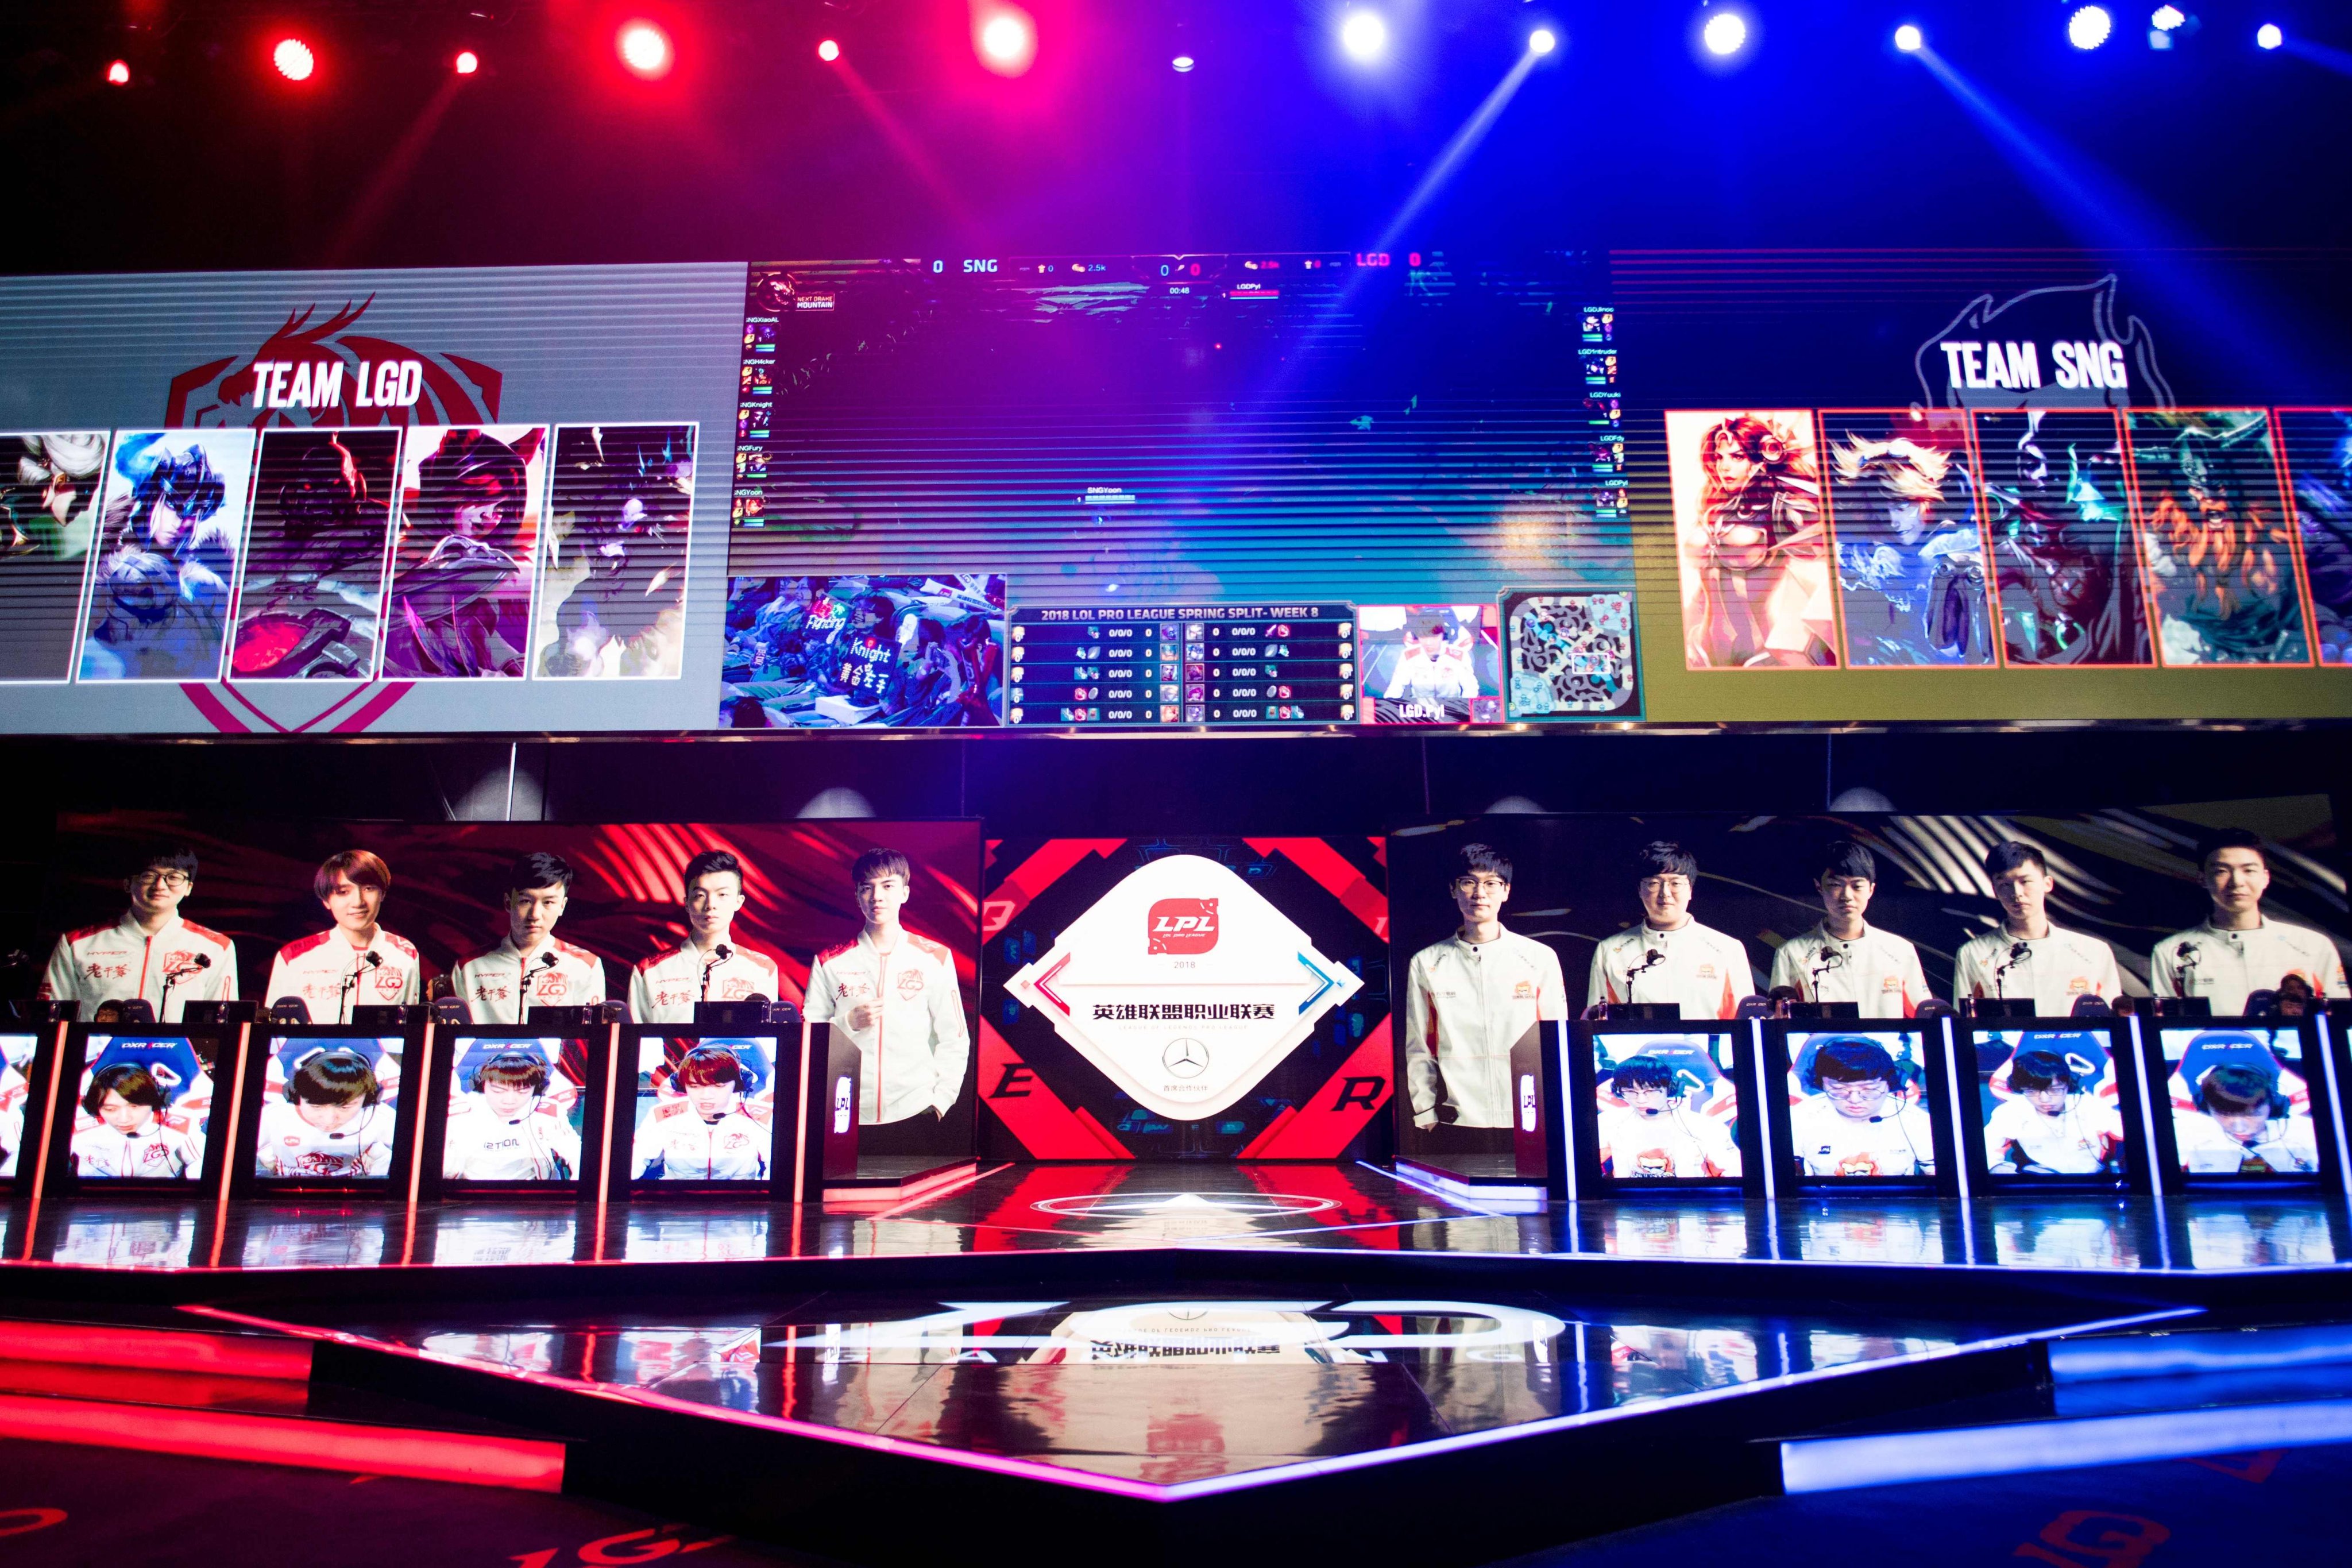 Strict Covid-19 control measures in China have made it a challenge for esports tournament organisers to hold live events where fans can cheer their favourite teams. Photo: Agence France-Presse